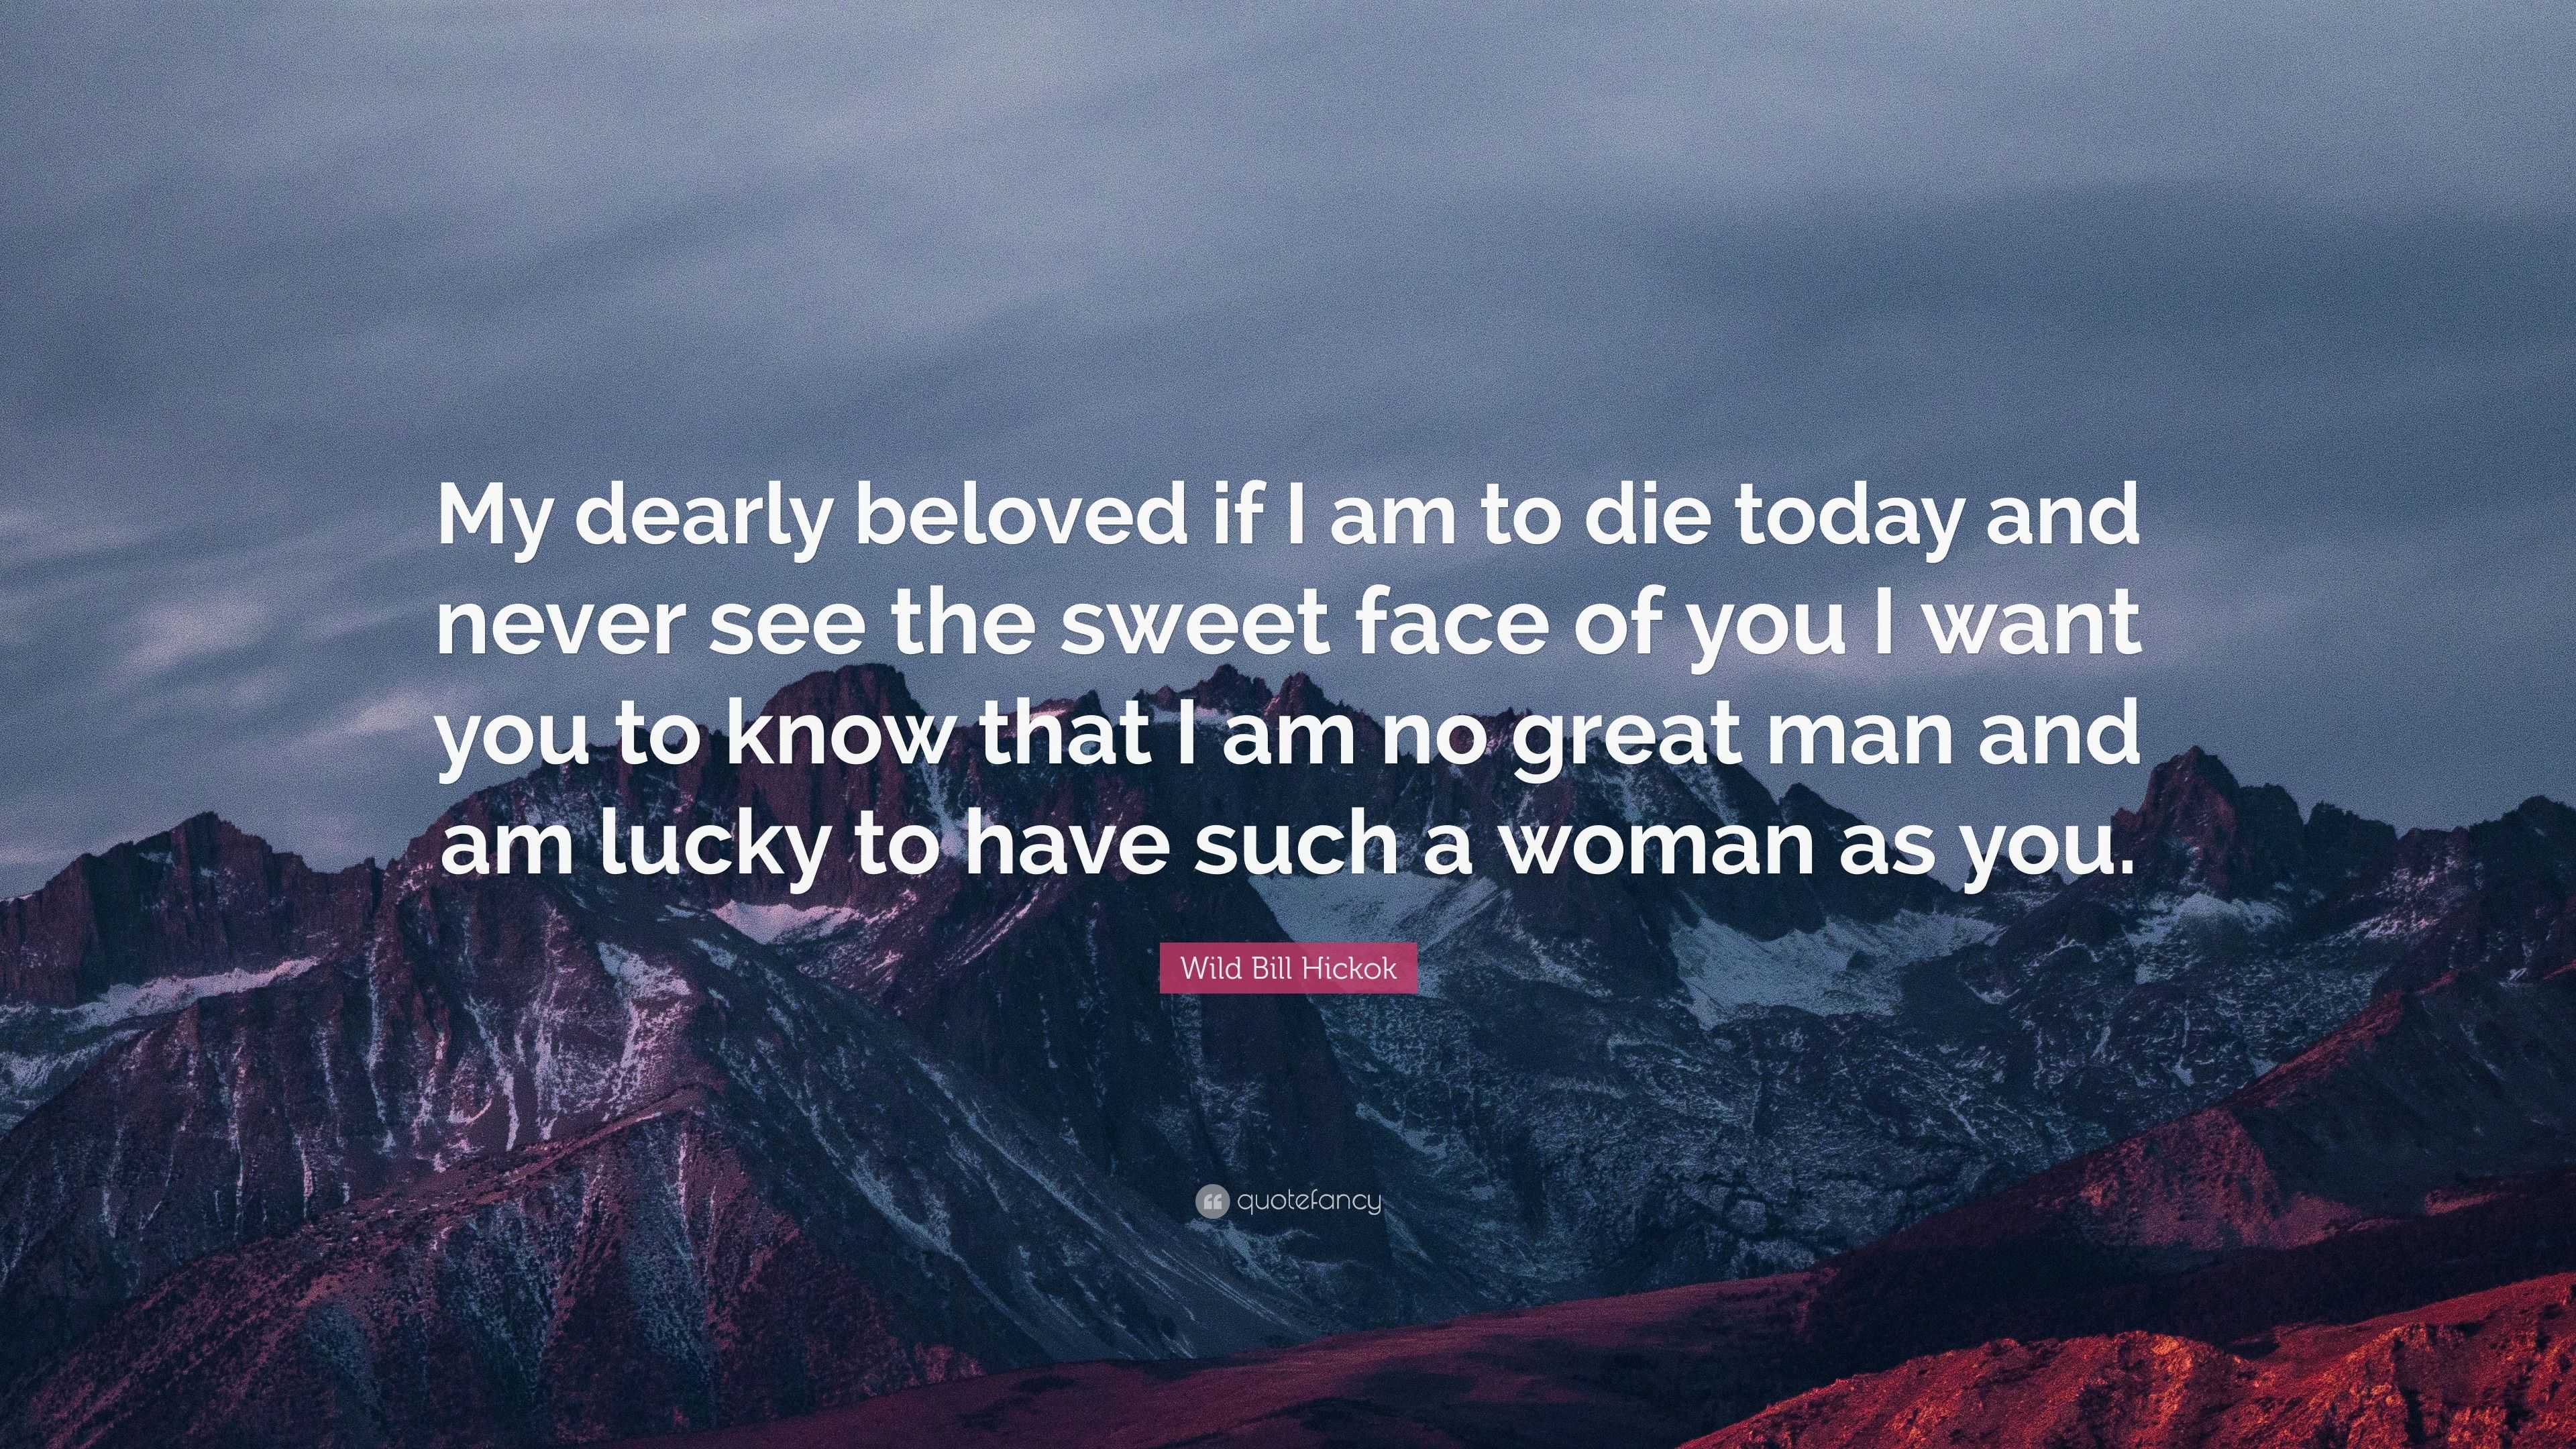 Wild Bill Hickok Quote: “My dearly beloved if I am to die today and ...